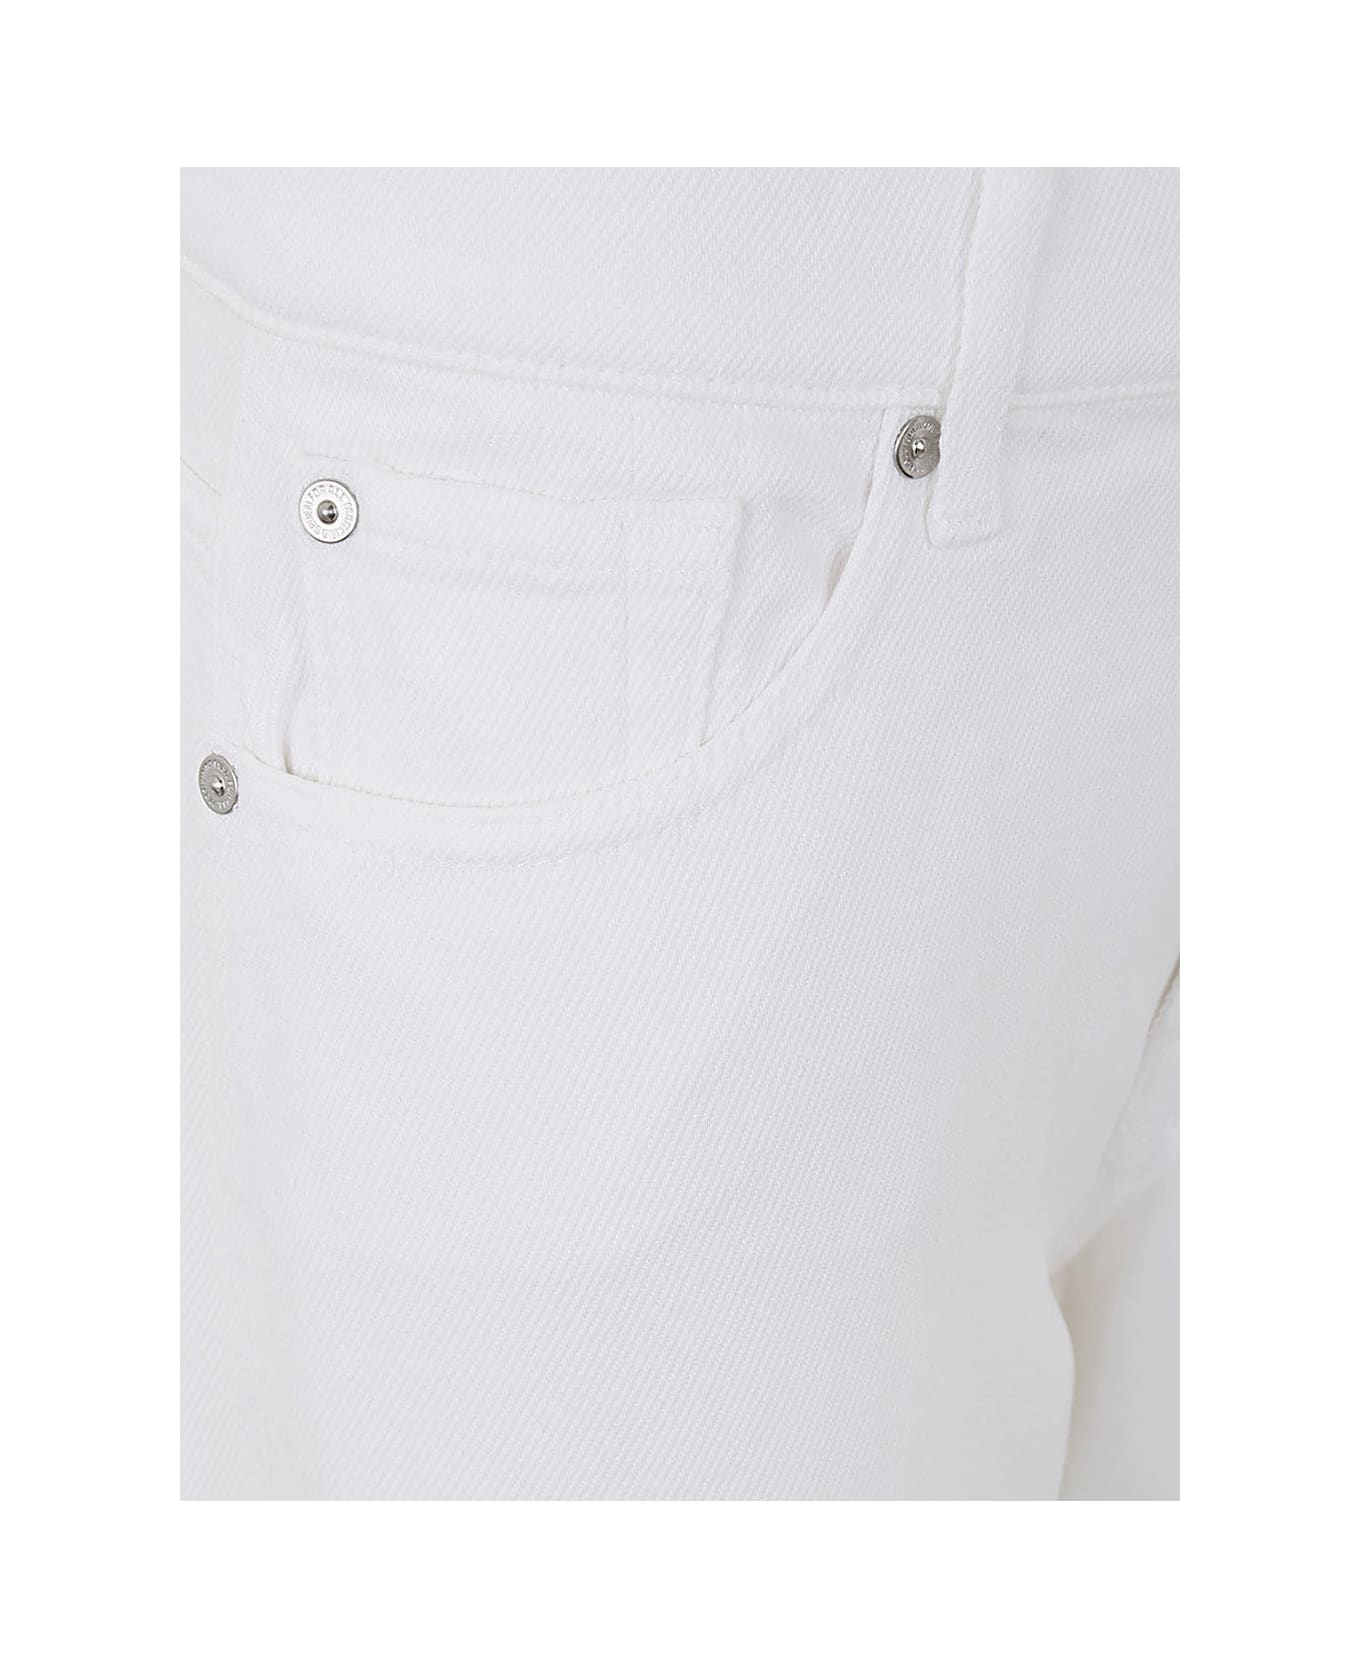 7 For All Mankind Tess Trouser Colored Tencel - White ボトムス